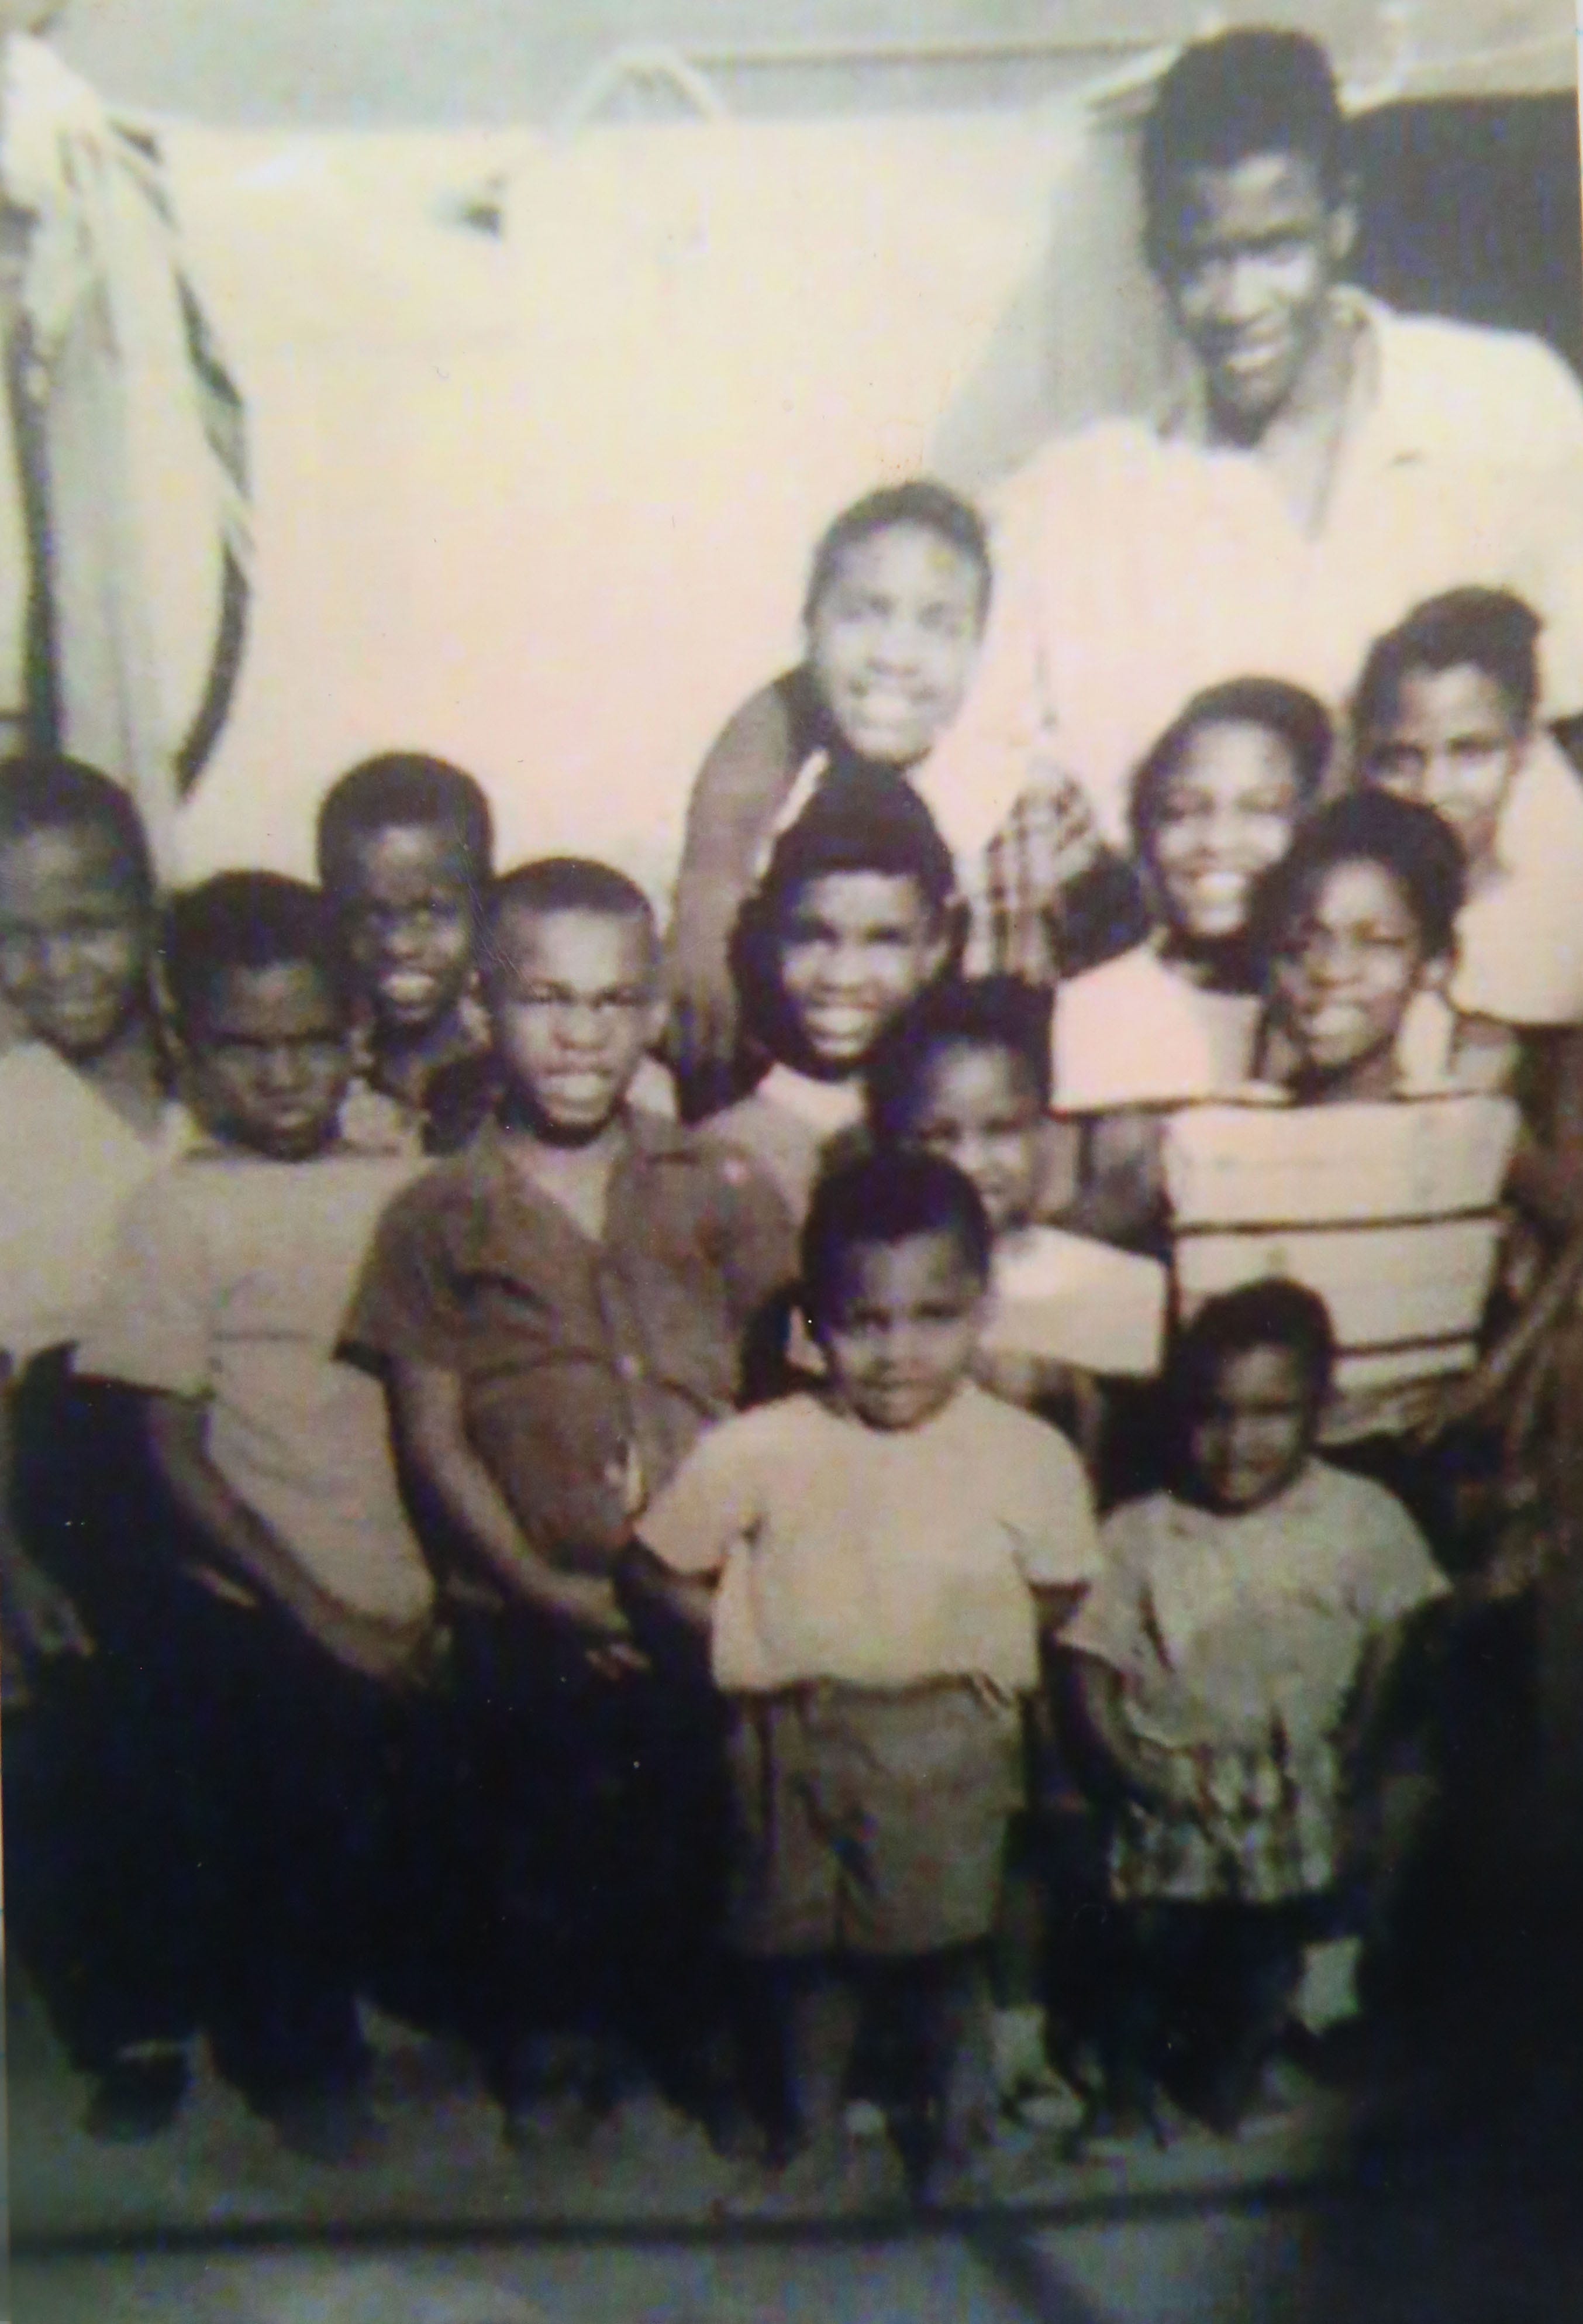 Elijah Edwards, second from left, with his 12 other siblings in this 1960’s family photo.